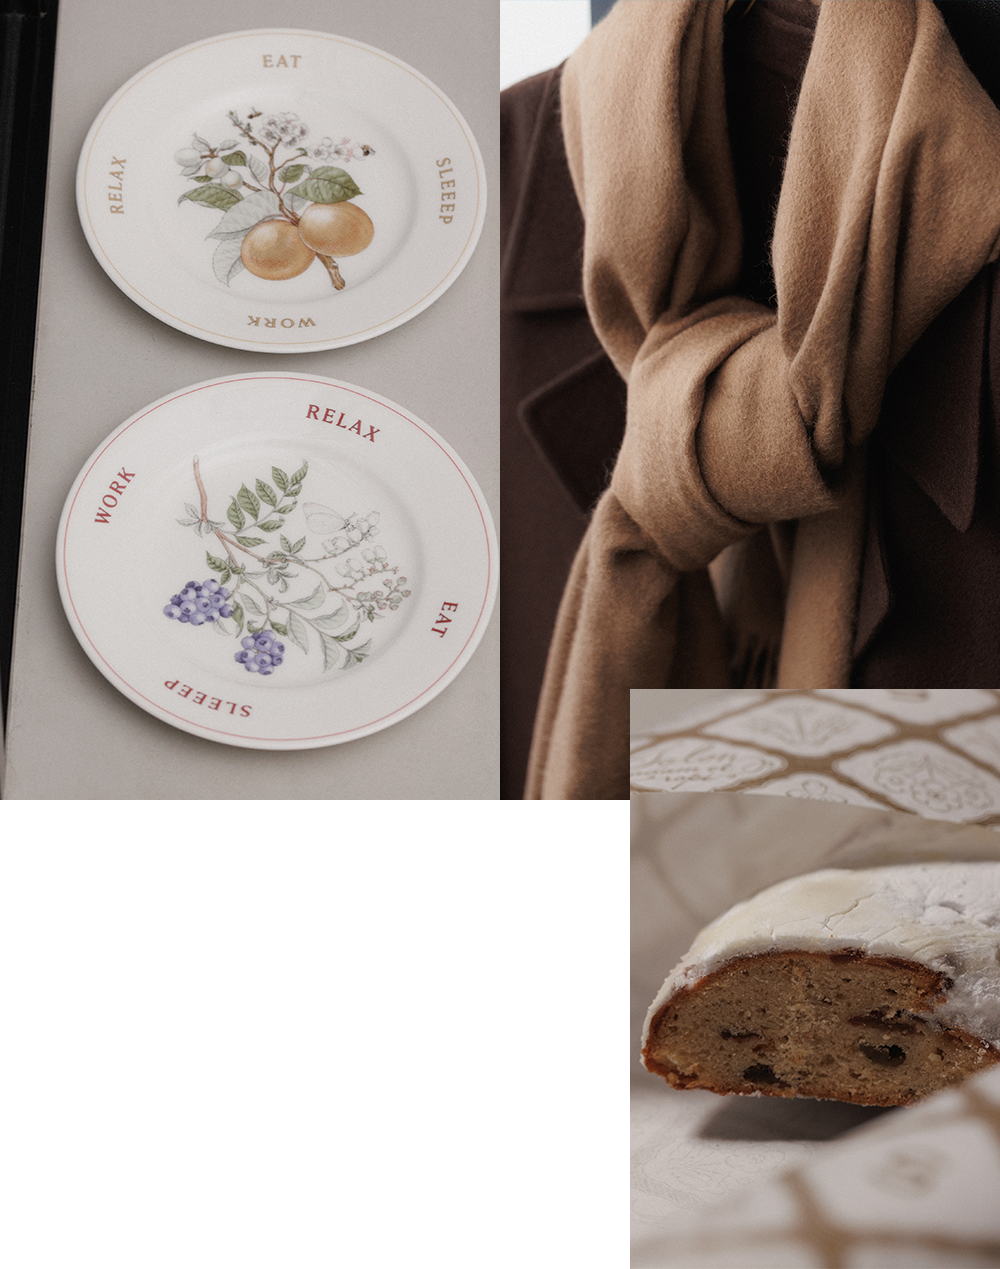 LIFE IS A GIFT